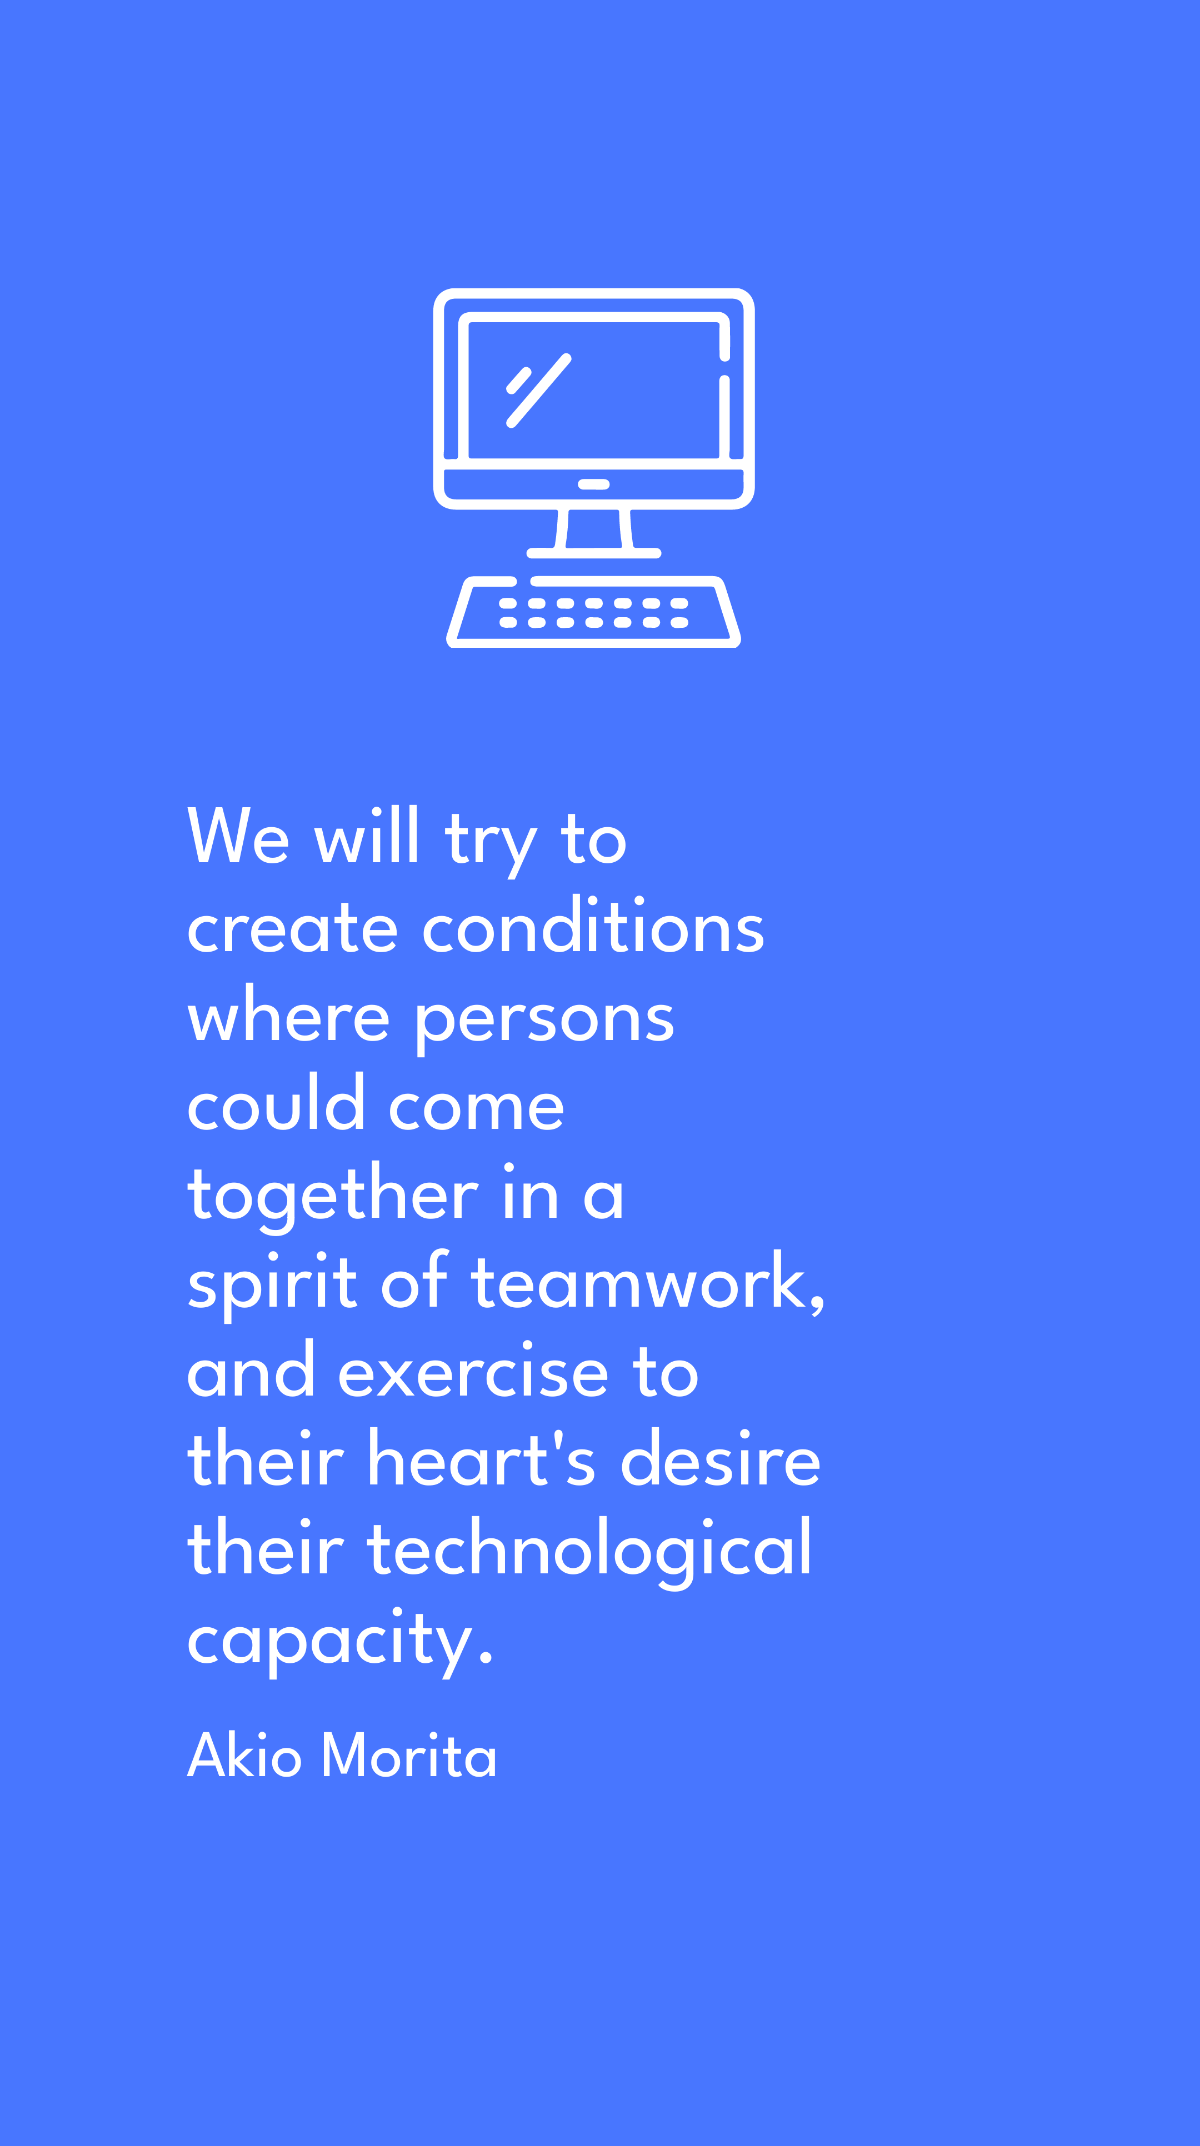 Akio Morita - We will try to create conditions where persons could come together in a spirit of teamwork, and exercise to their heart's desire their technological capacity.